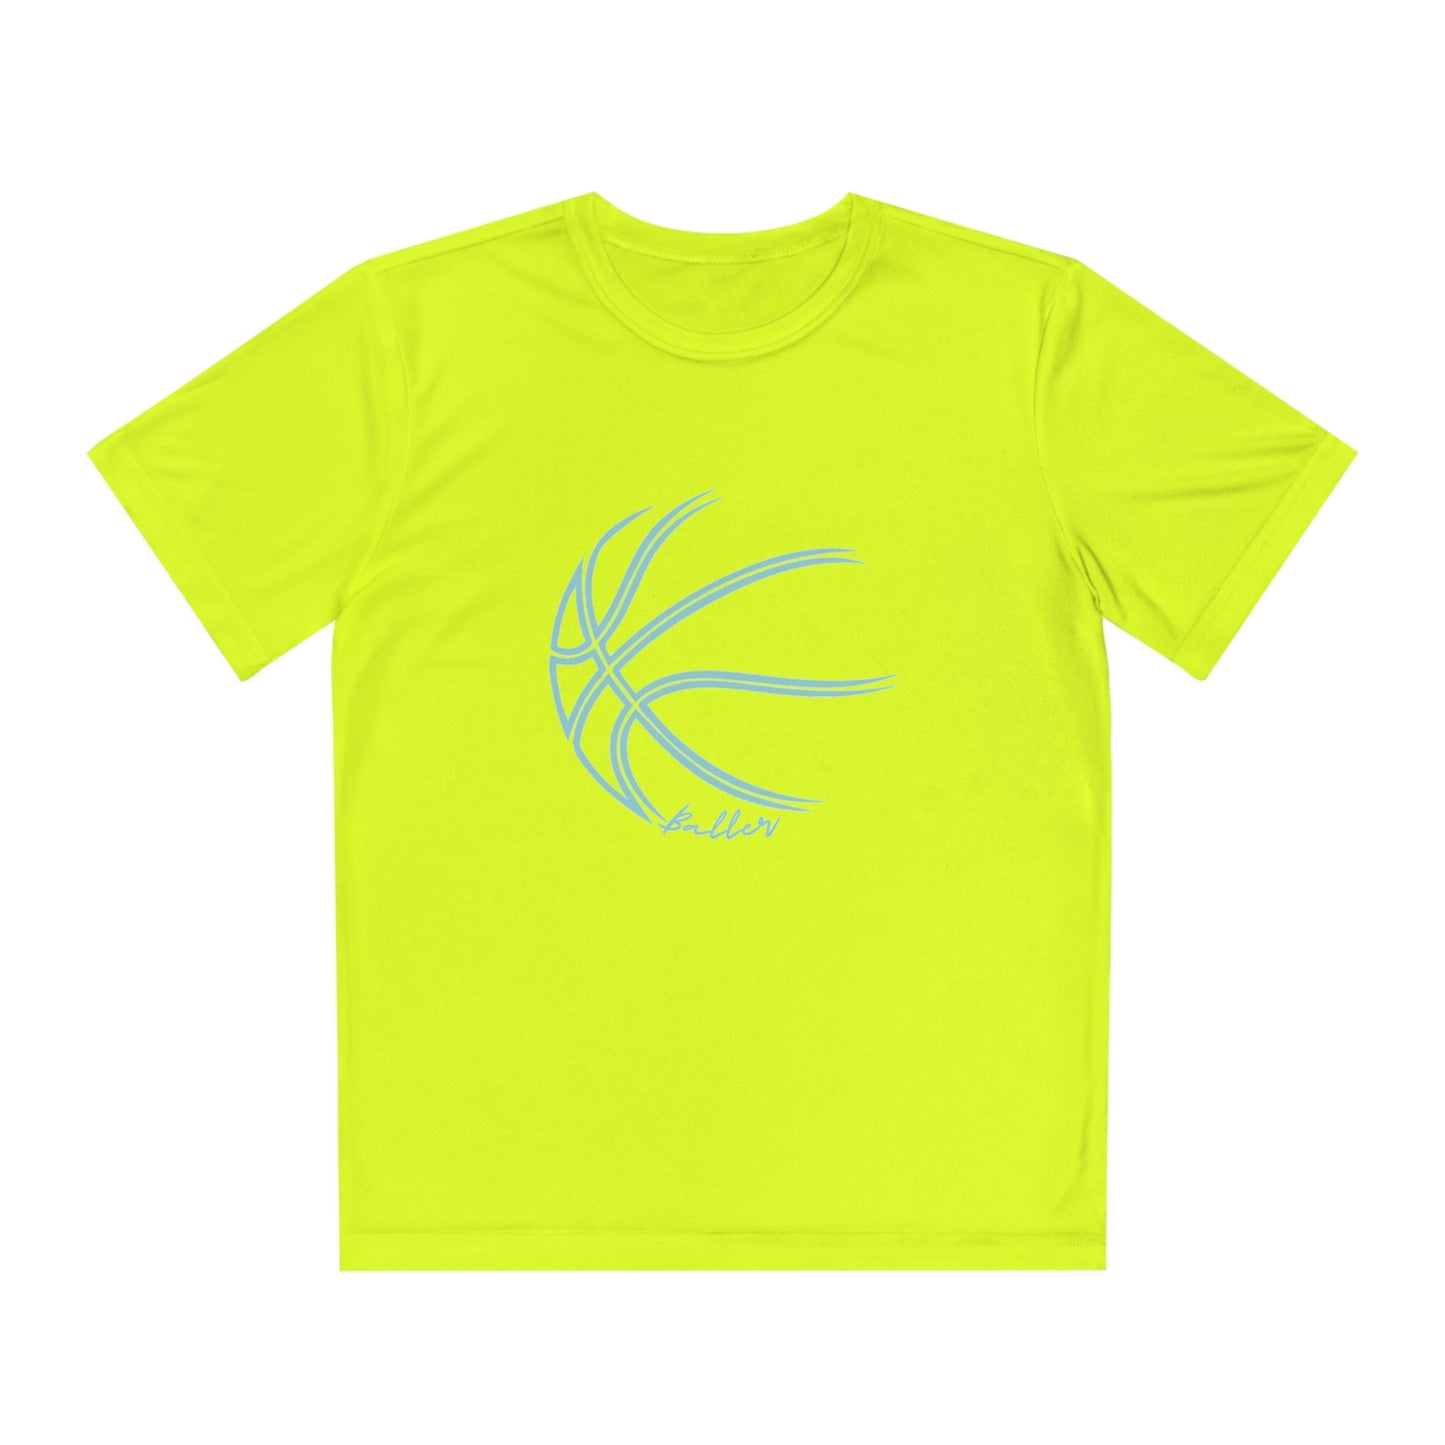 Baller I inspired by Jase & Pierce - Youth Competitor Tee